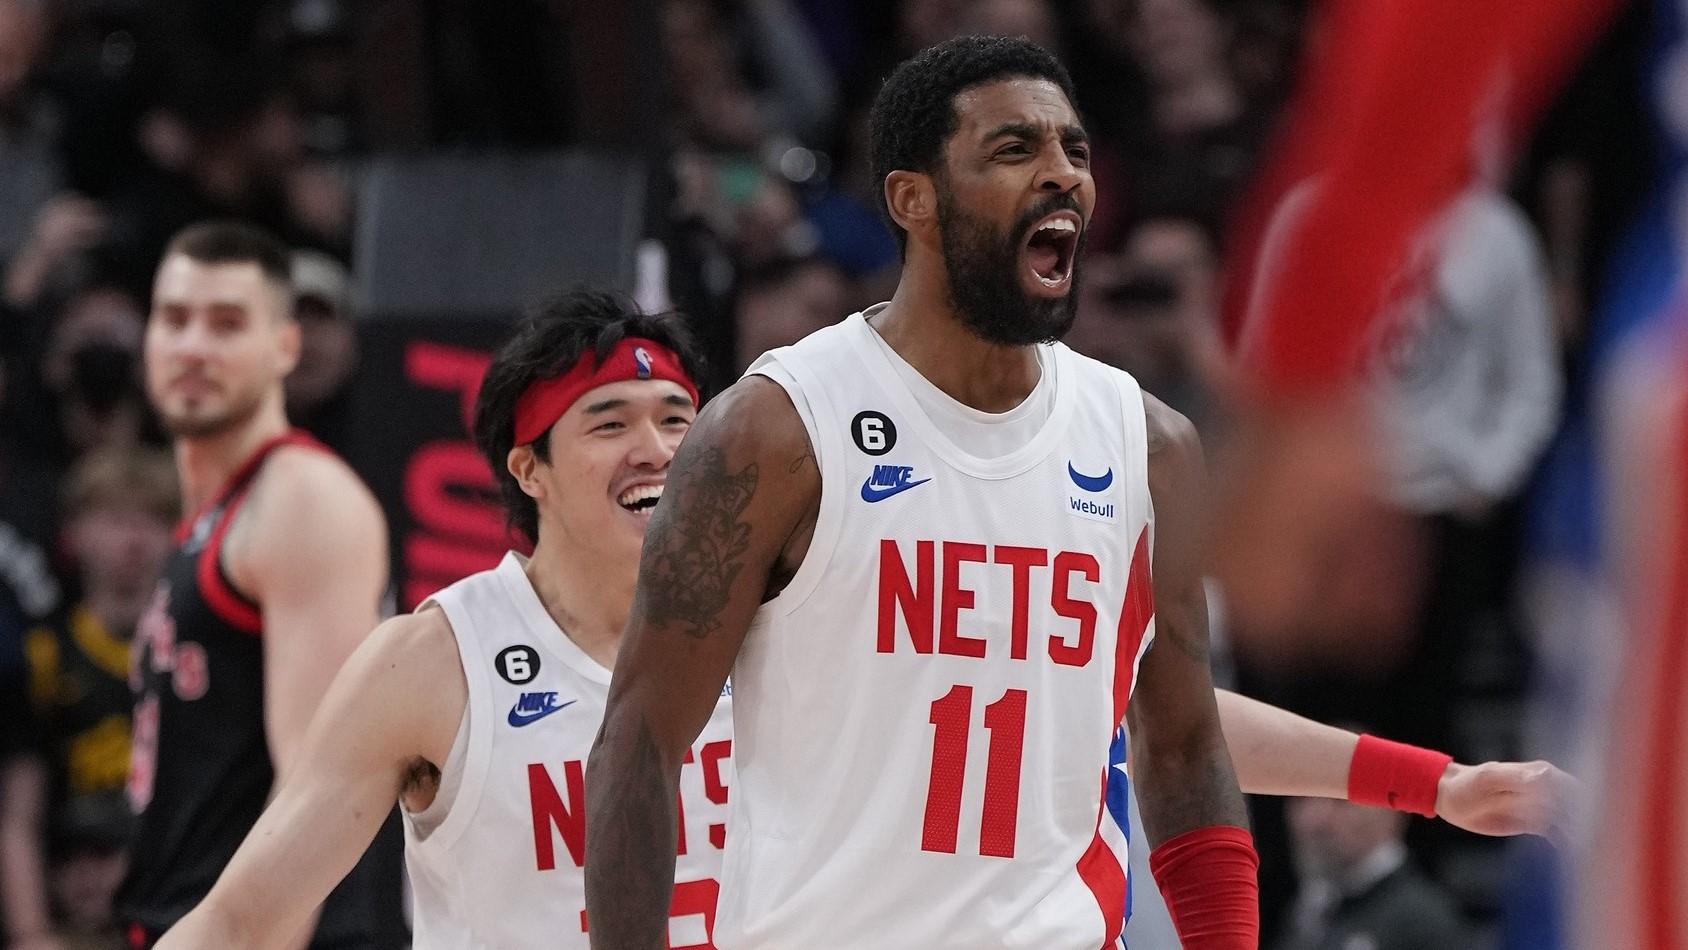 Dec 16, 2022; Toronto, Ontario, CAN; Brooklyn Nets guard Kyrie Irving (11) celebrates after shooting the winning basket against the Toronto Raptors during the fourth quarter at the Scotiabank Arena. / Nick Turchiaro-USA TODAY Sports